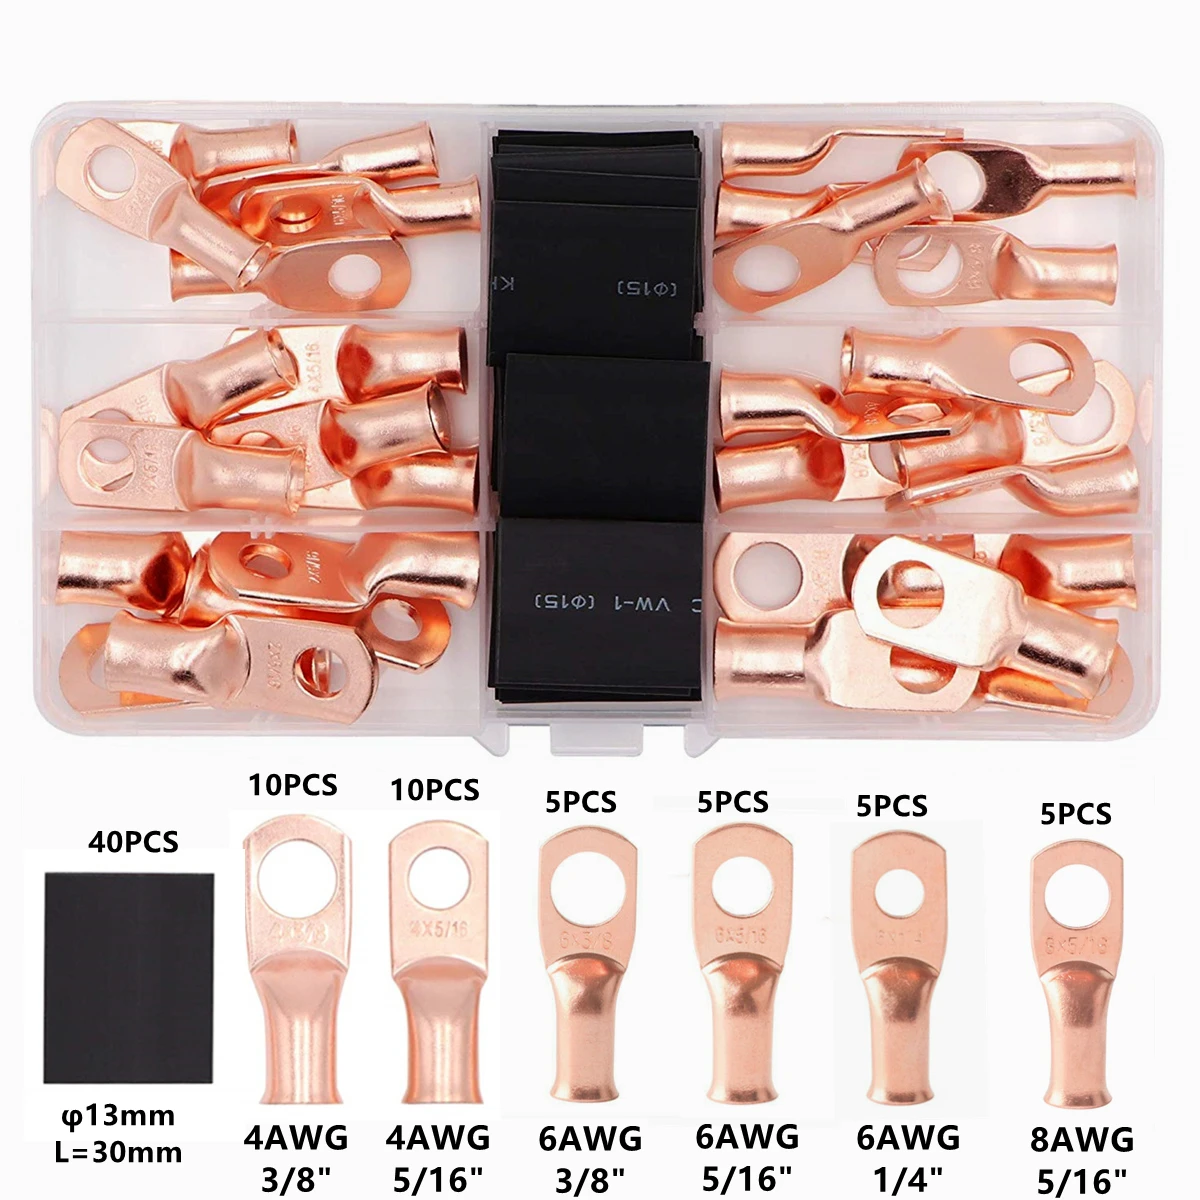 

80Pcs 2/4/6AWG 3/8" 5/16" Bare Copper Lug Ring Wire Connectors Cable Splice Crimp Terminals Heat Shrink Sleeve Assorted Kit